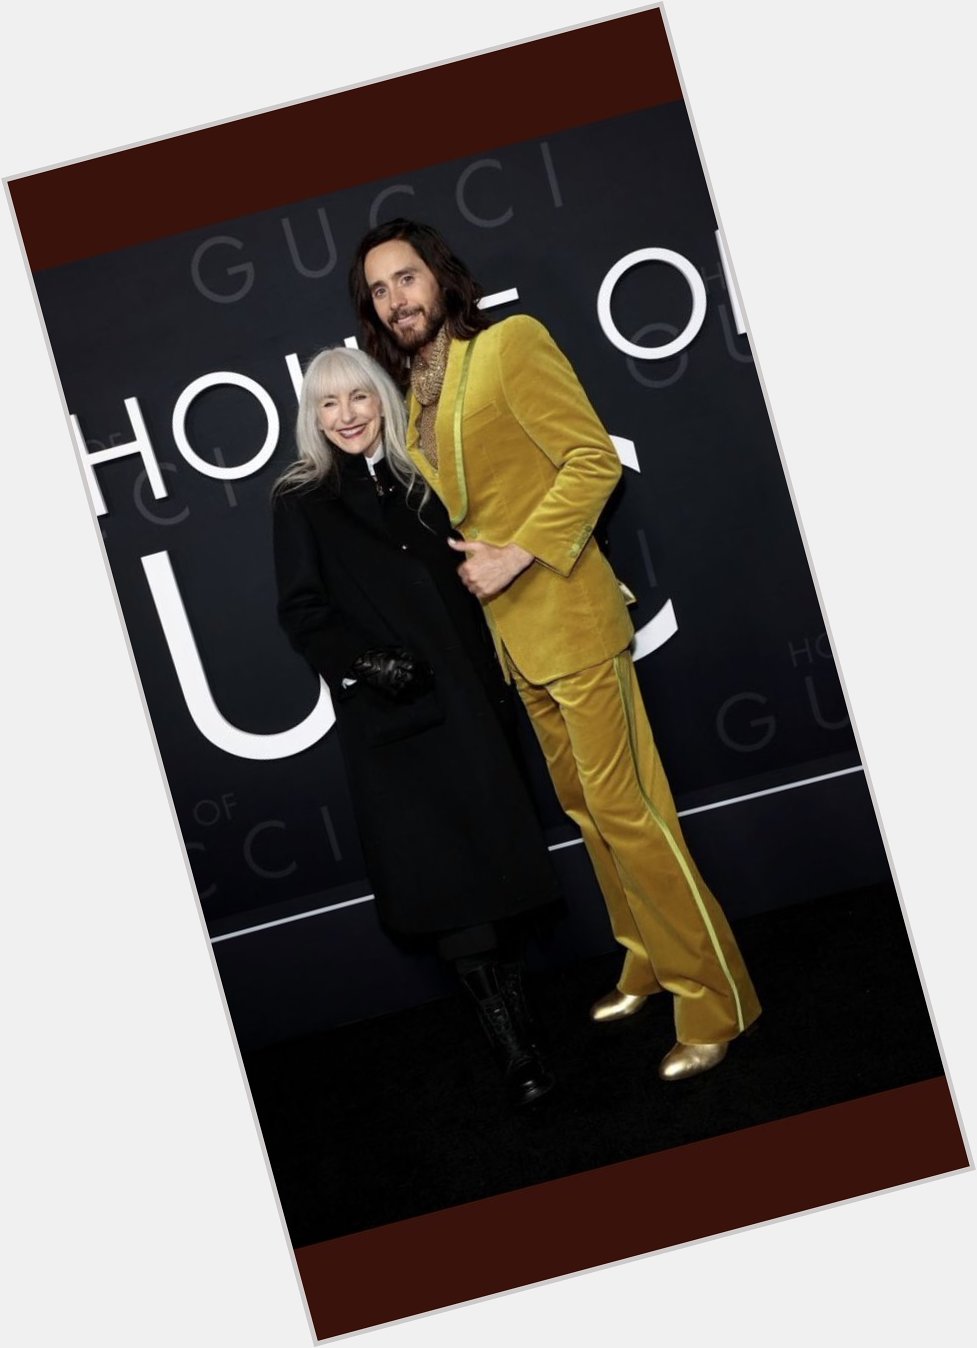 Happy birthday to Jared Leto s mom Constance Leto I met her at camp MARS in 2016 she is a fucking awesome lady! 